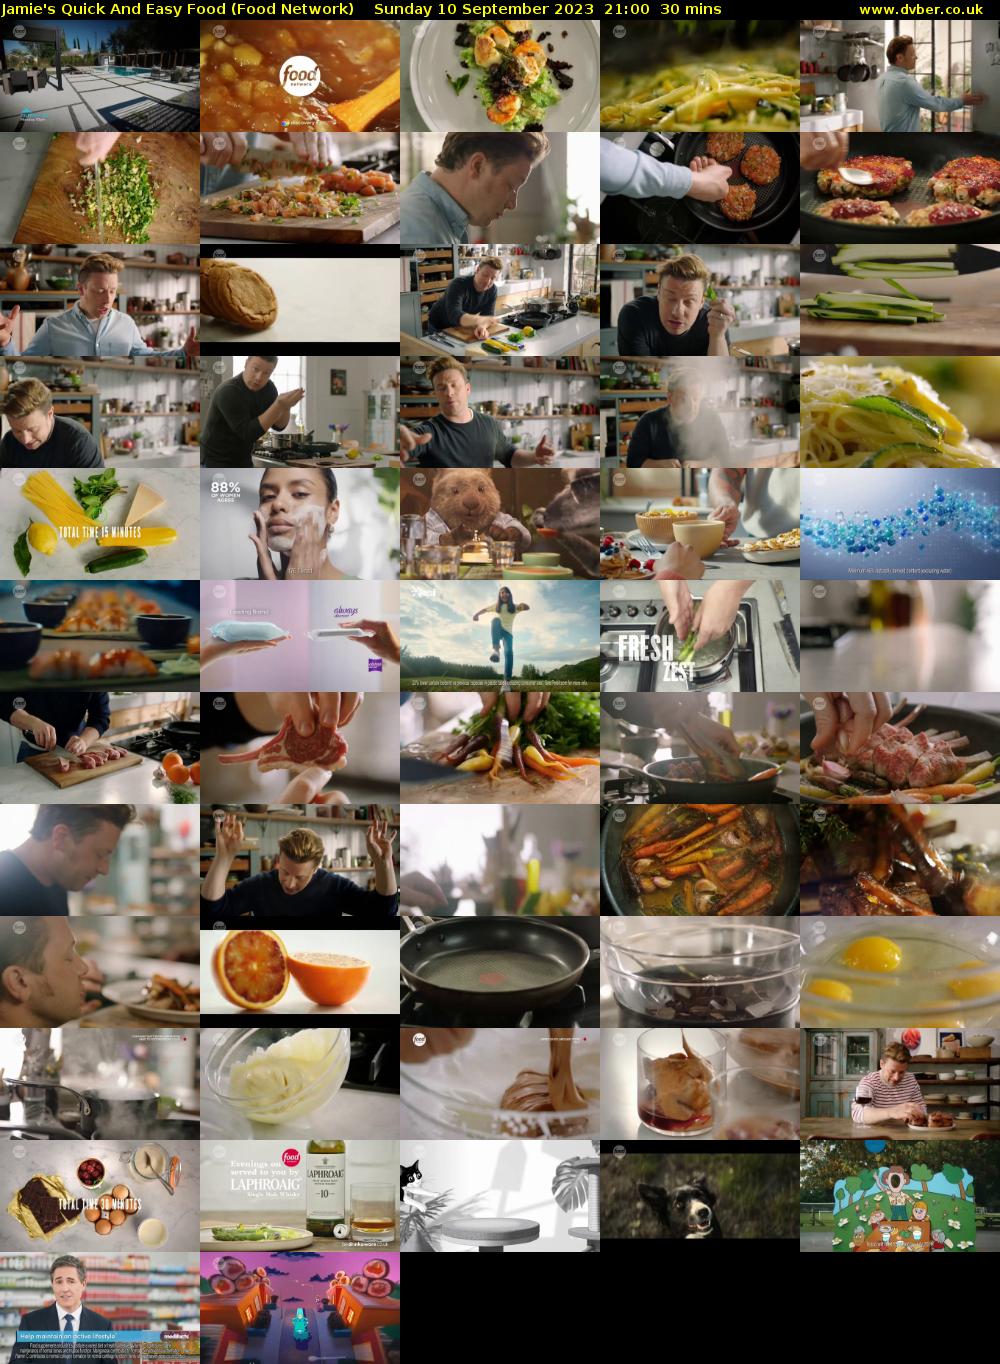 Jamie's Quick And Easy Food (Food Network) Sunday 10 September 2023 21:00 - 21:30